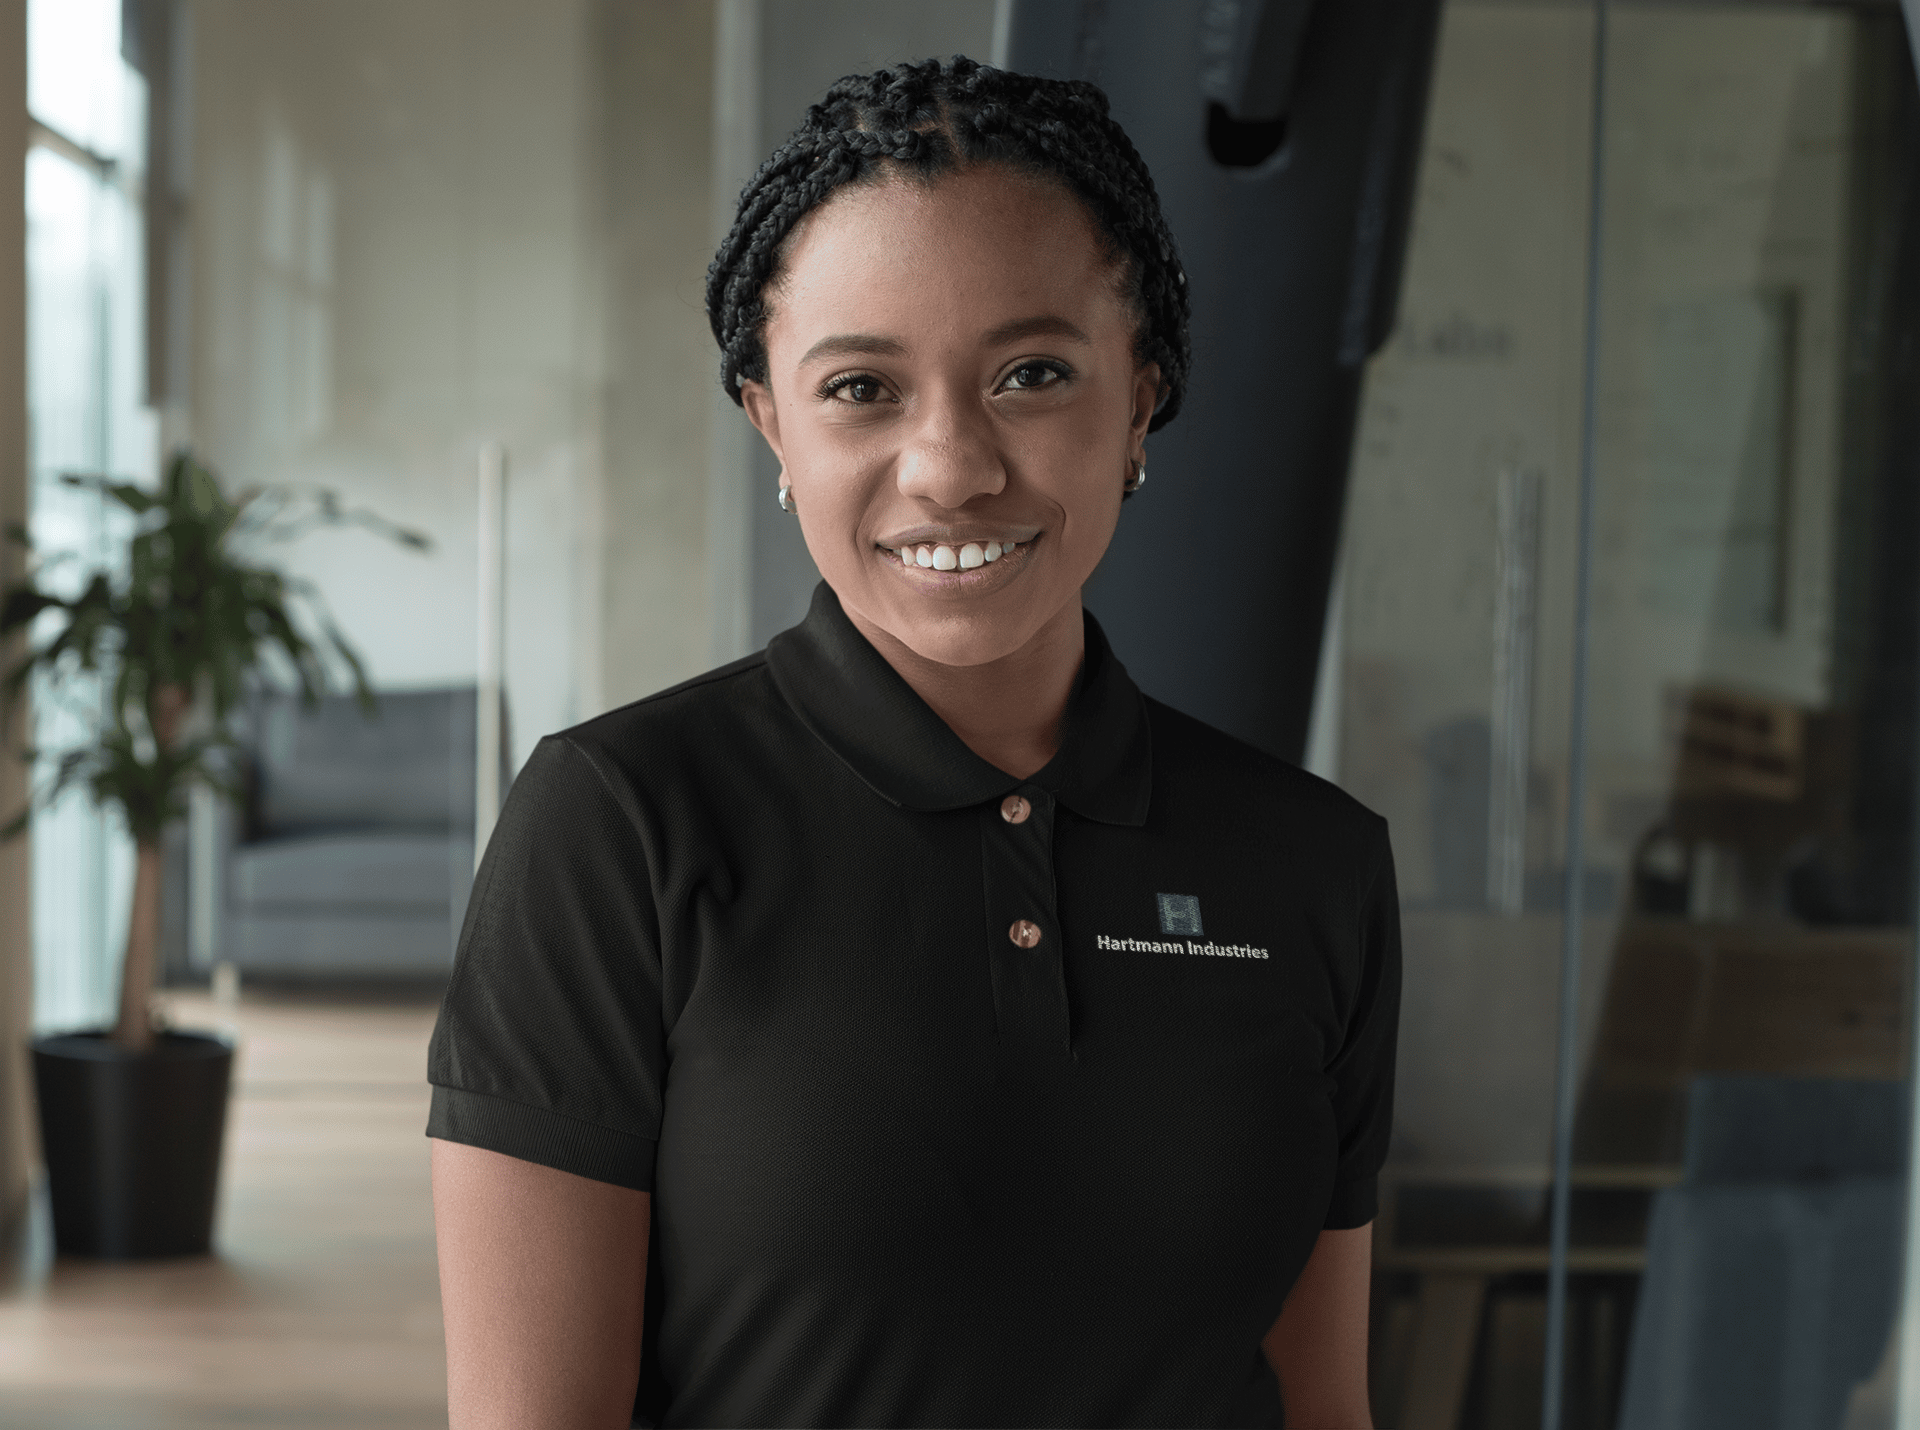 Smiling woman wearing a Hartmann Industries polo shirt in office